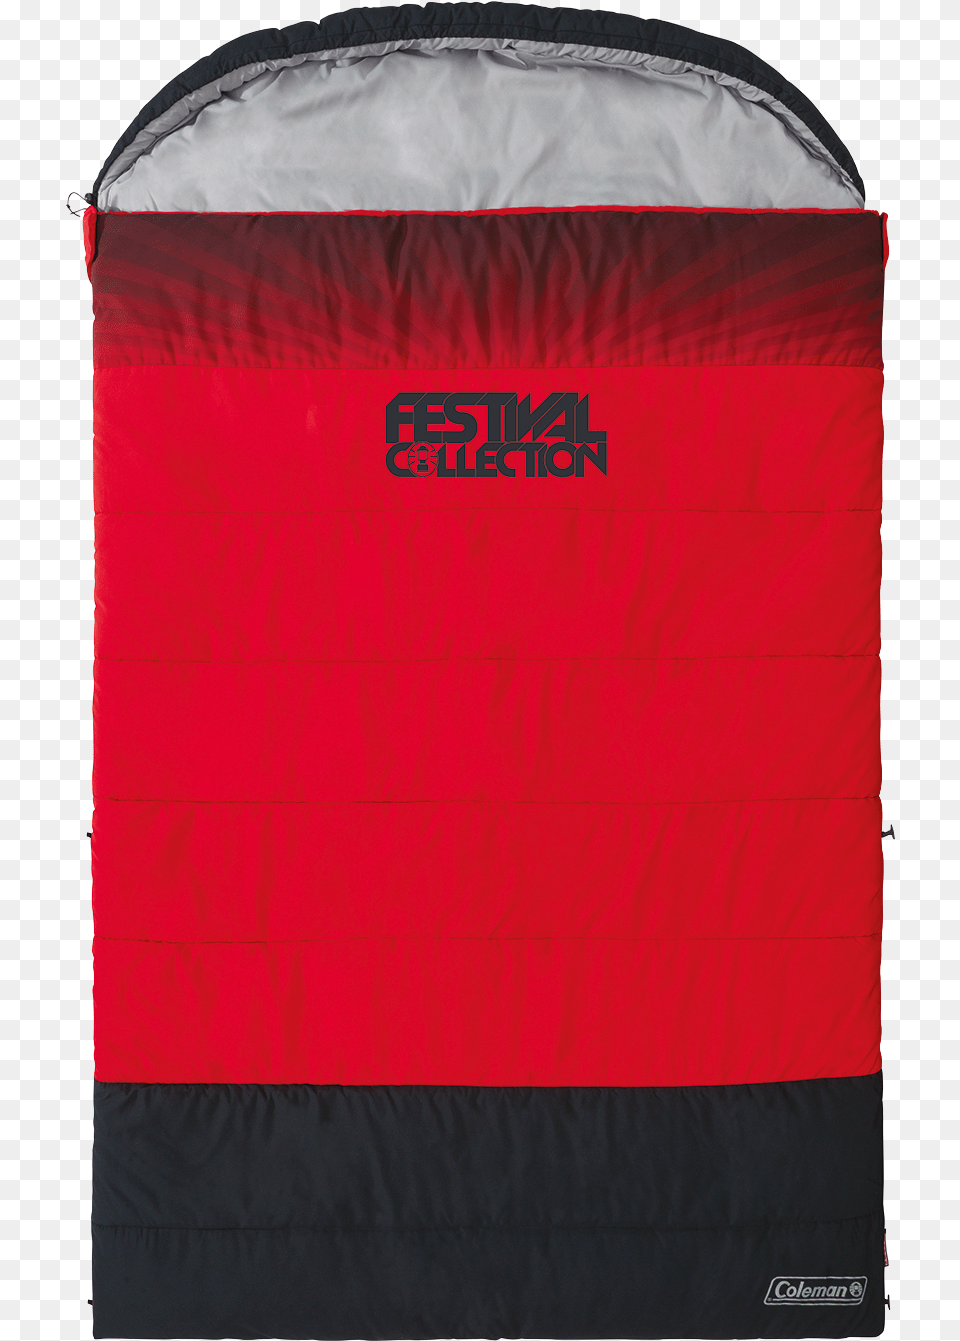 Coleman Festival Collection Double Sleeping Bag Redblack Coleman Festival Sleeping Bag, Blanket, Flag, Tent Free Png